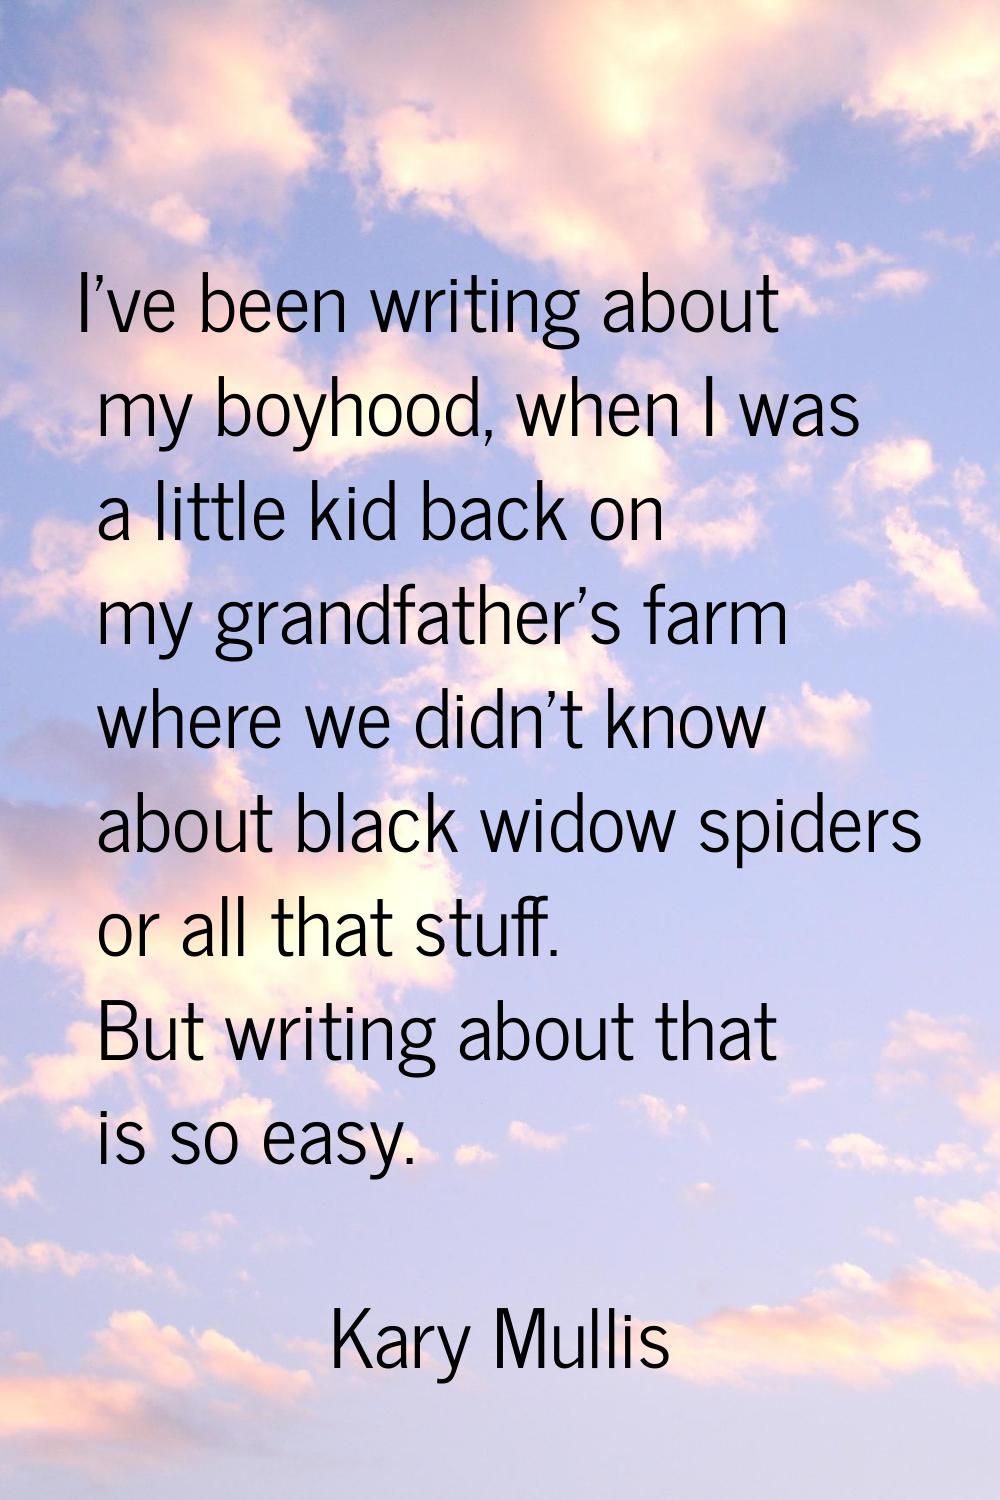 I've been writing about my boyhood, when I was a little kid back on my grandfather's farm where we 